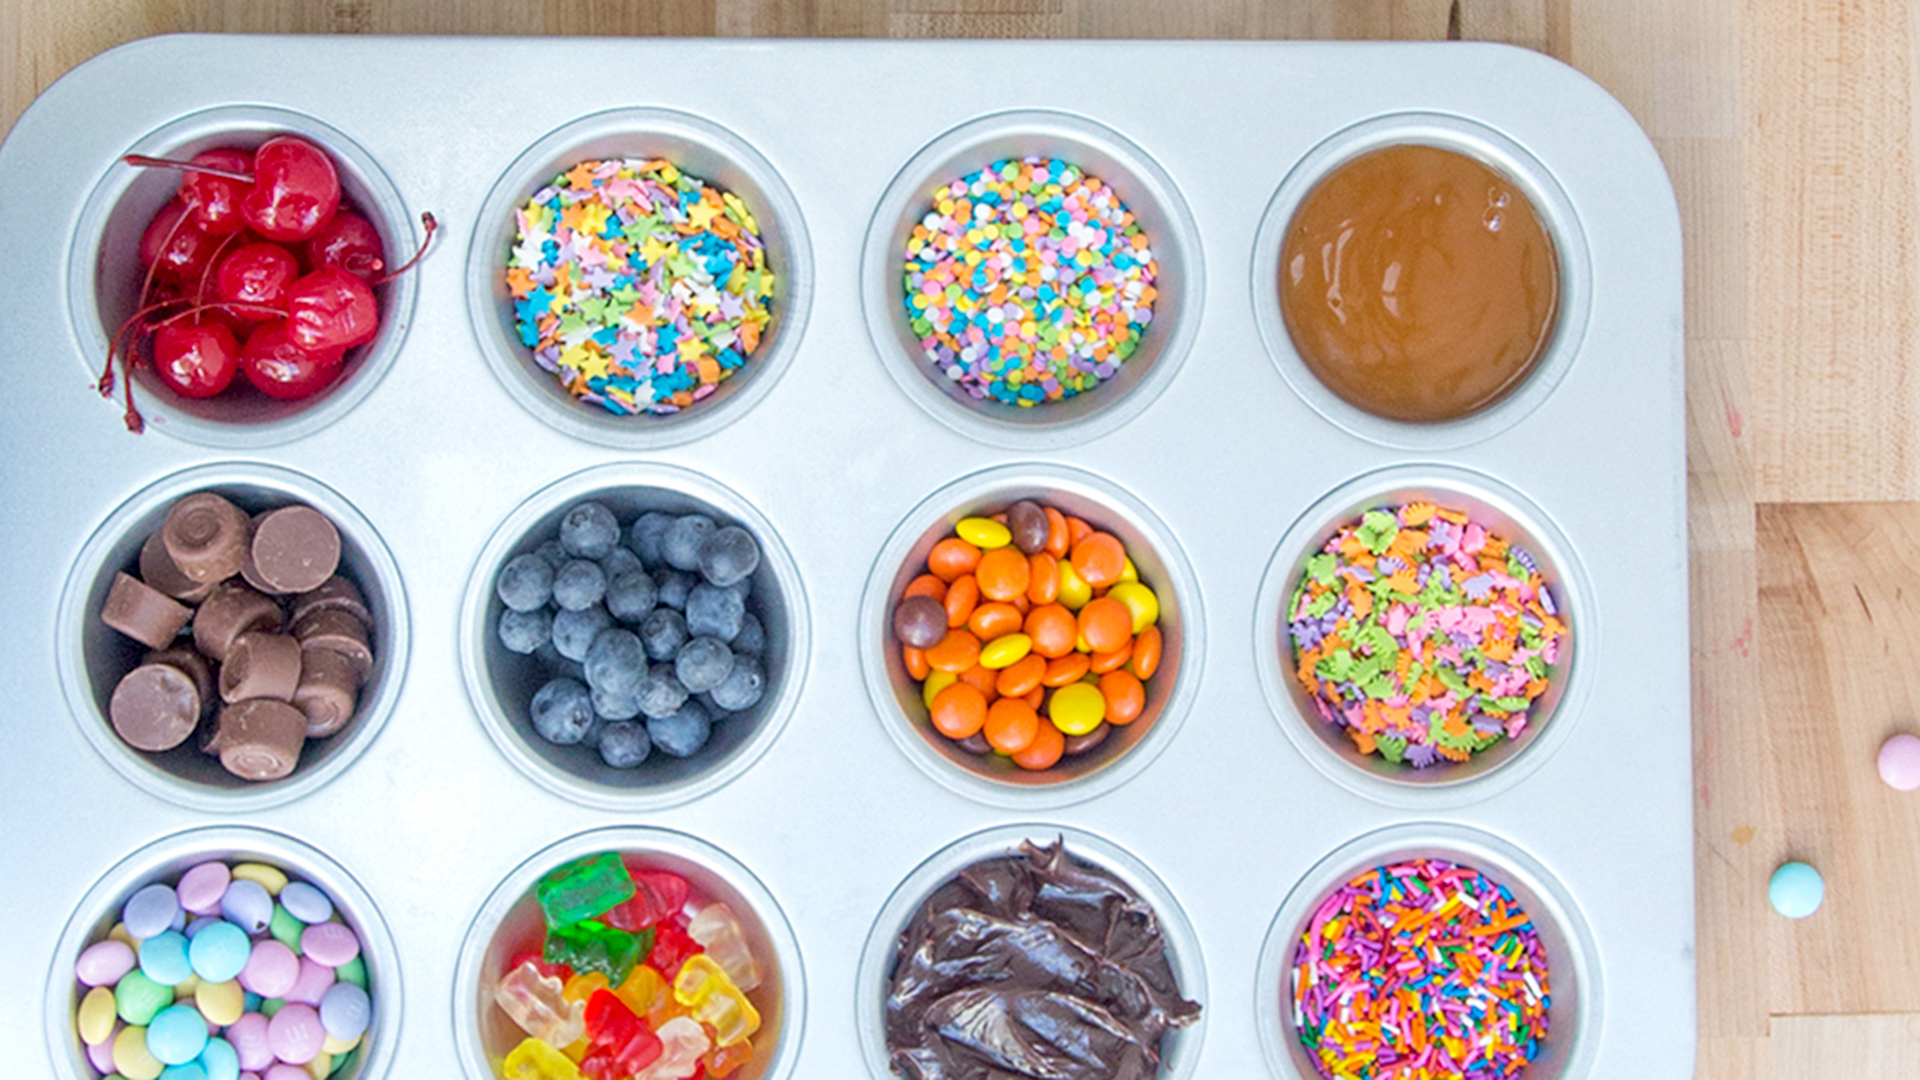 https://www.today.com/food/how-throw-party-ice-cream-bar-keep-toppings-organized-t42166